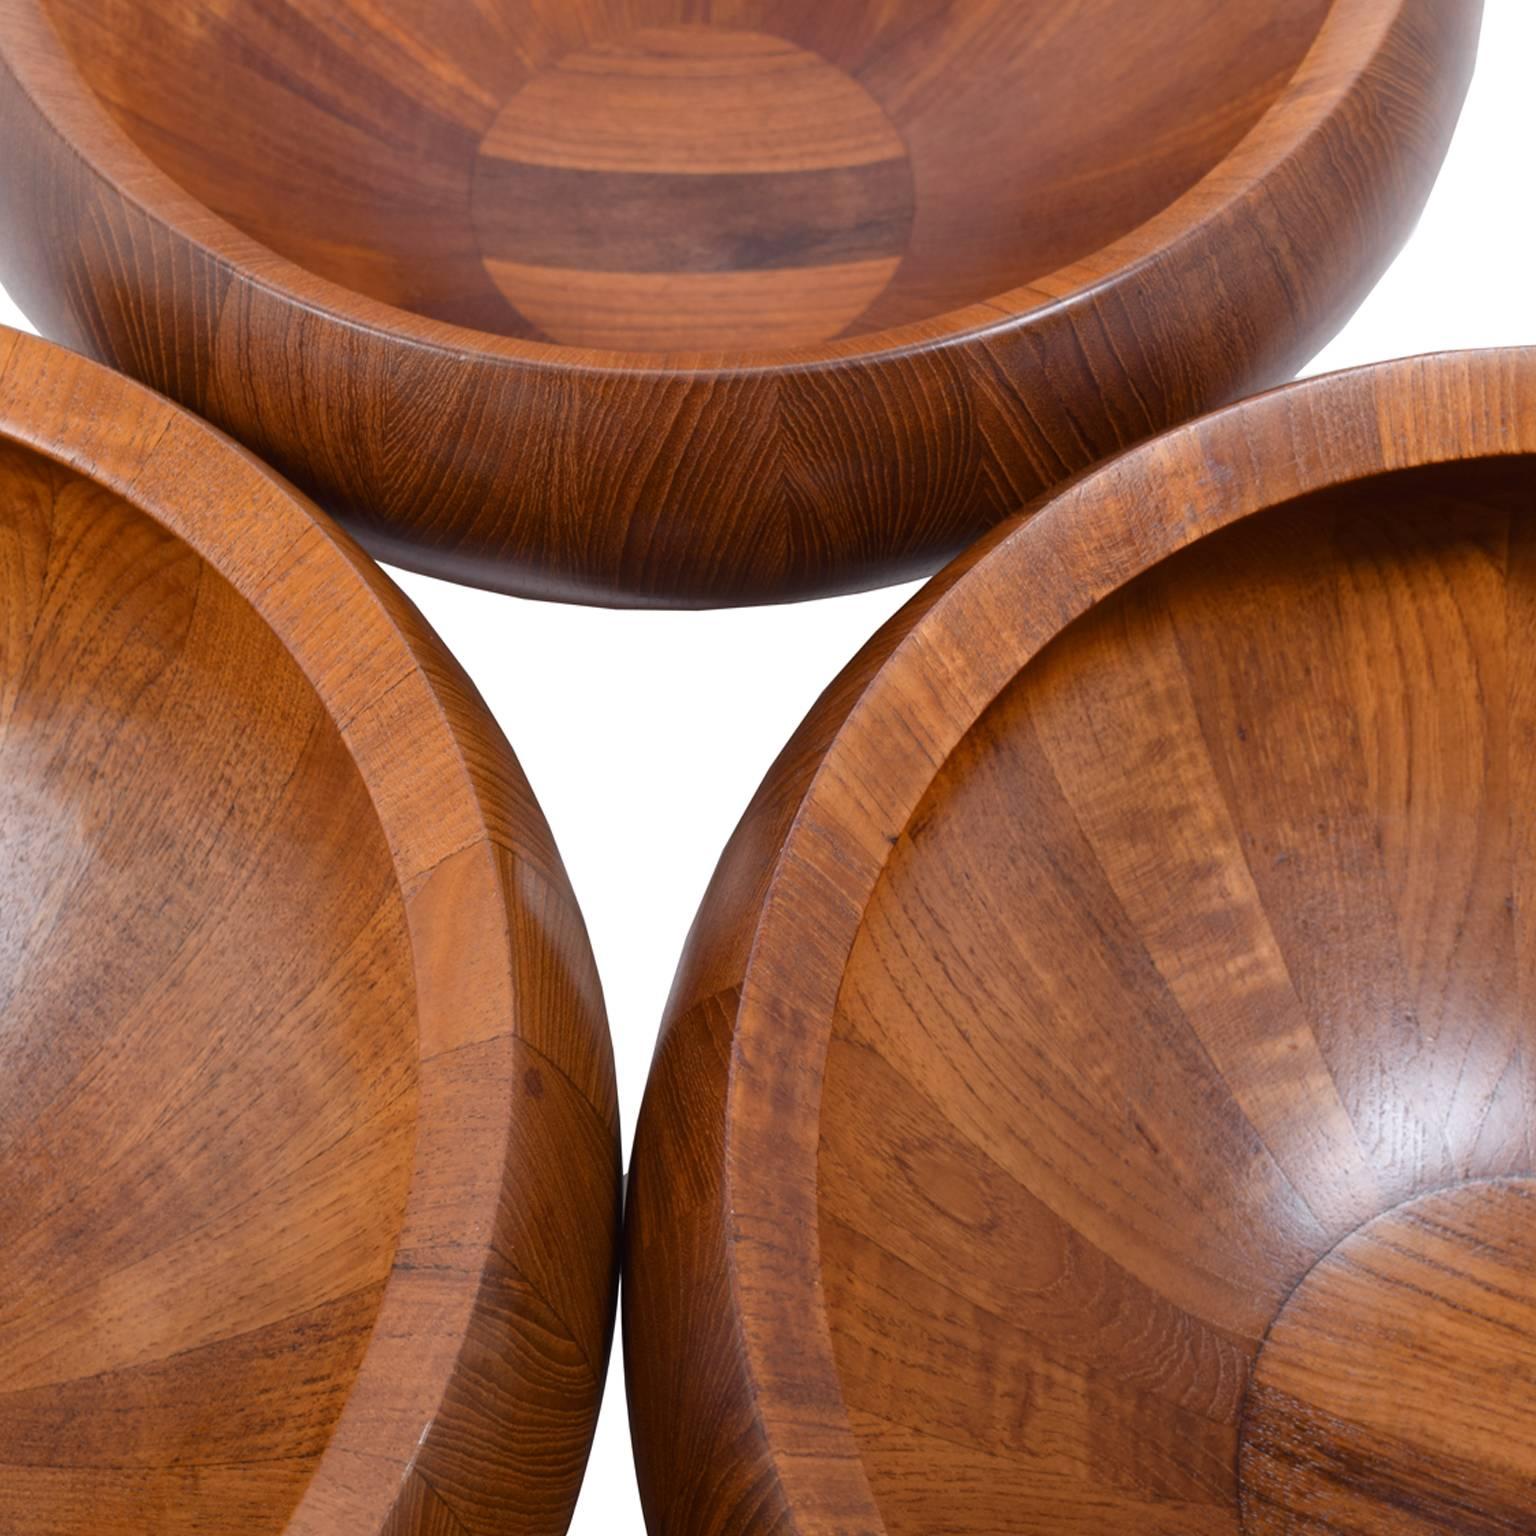 Mid-20th Century Jens H. Quistgaard Large Teak Bowls for Dansk one at NYDC